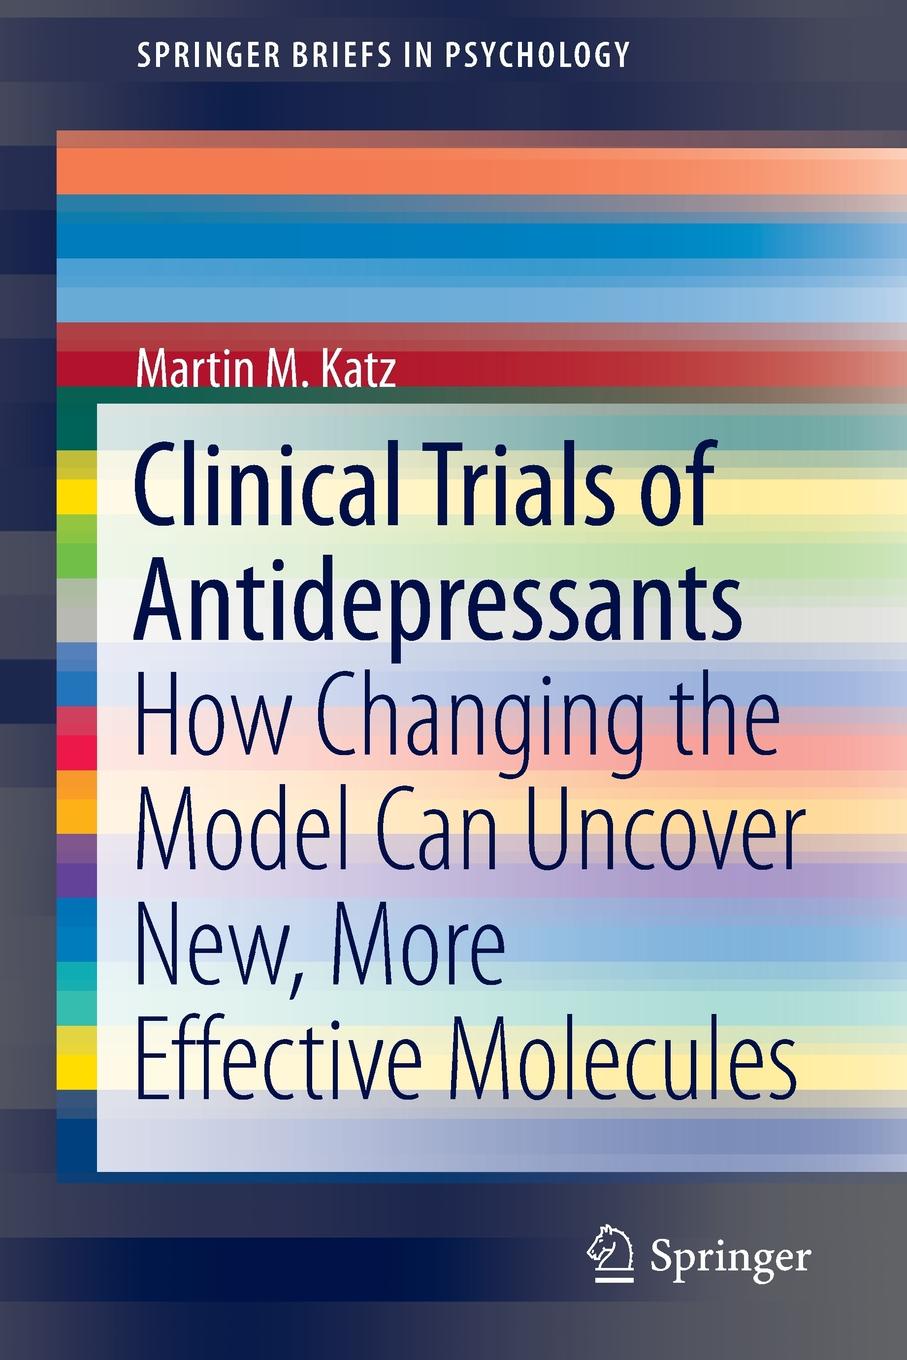 Clinical Trials of Antidepressants. How Changing the Model Can Uncover New, More Effective Molecules